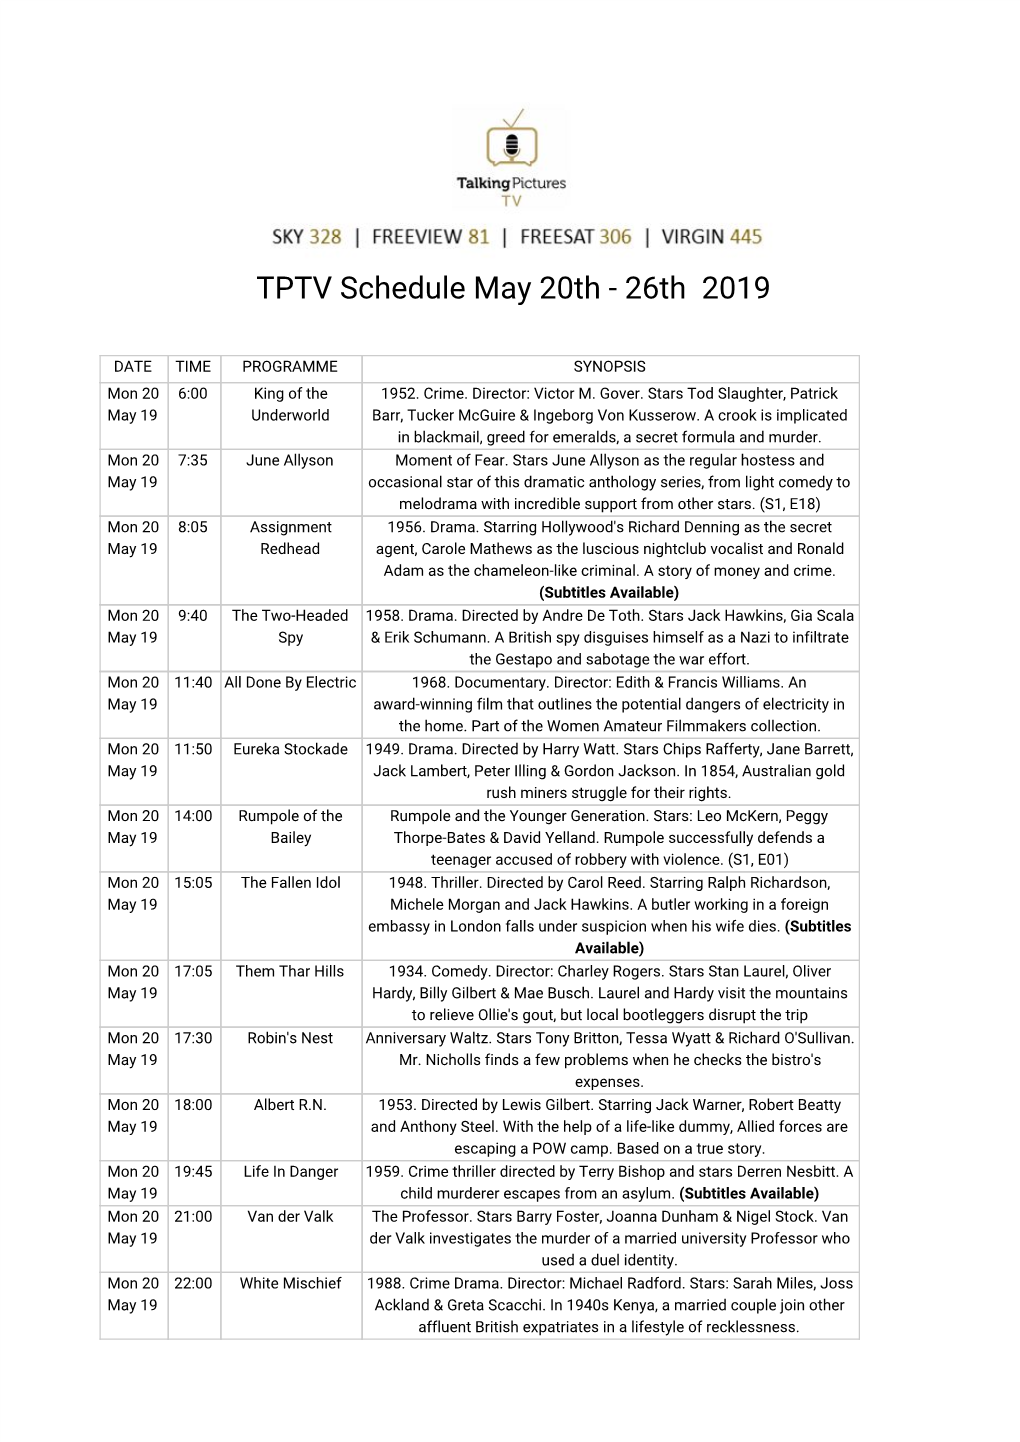 TPTV Schedule May 20Th - 26Th 2019